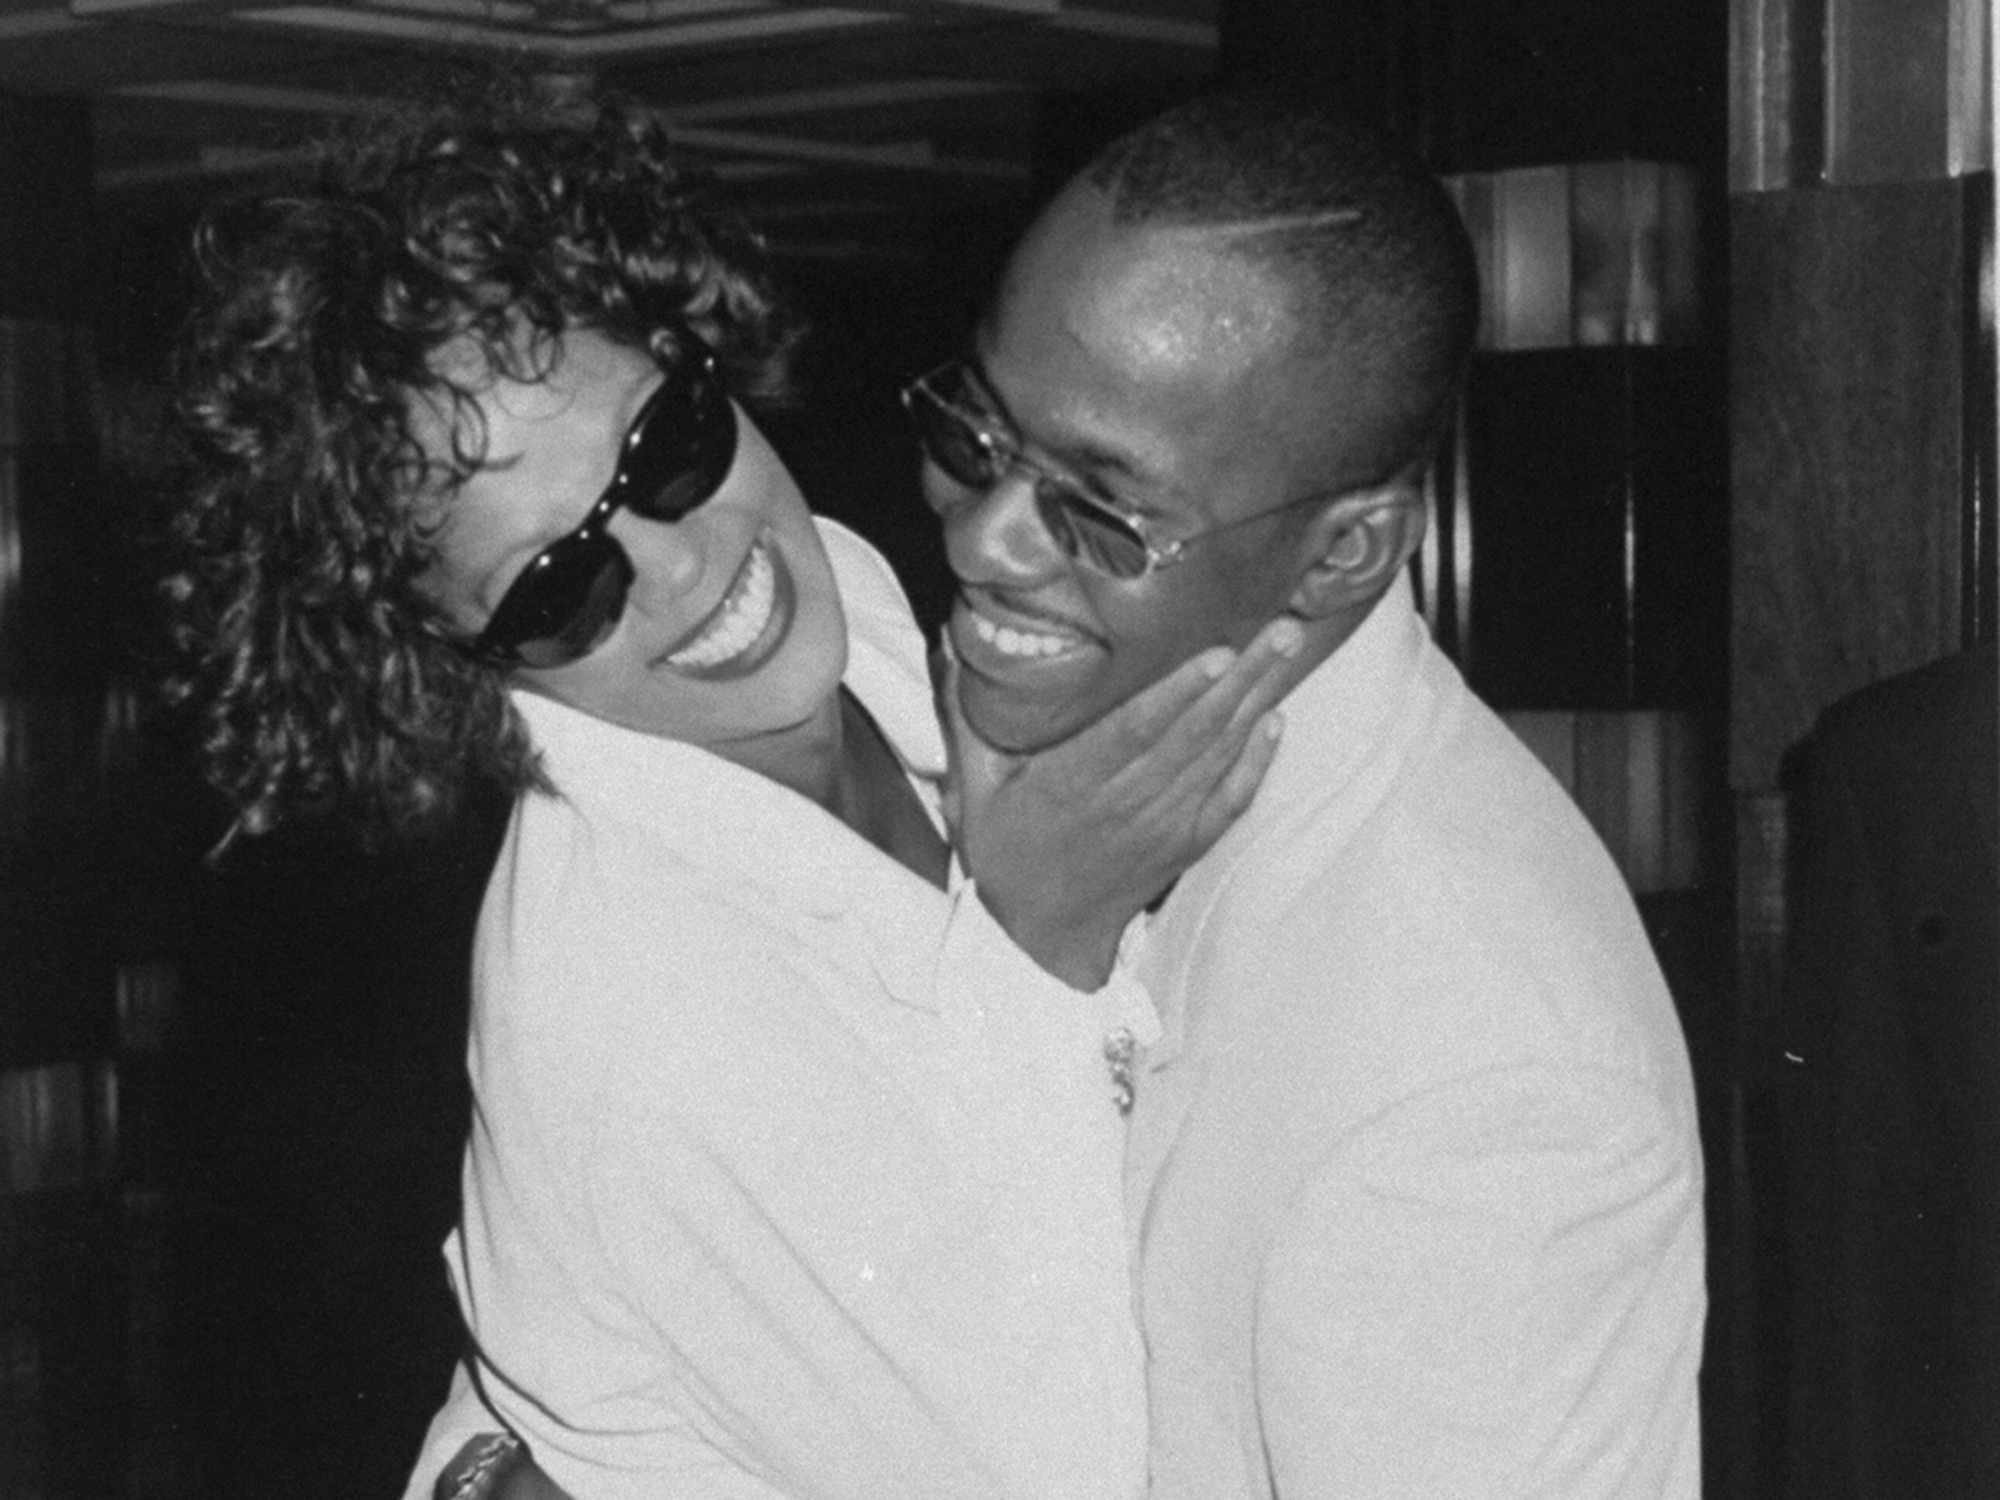 Whitney Houston and Bobby Brown wearing sunglasses and hugging after her concert